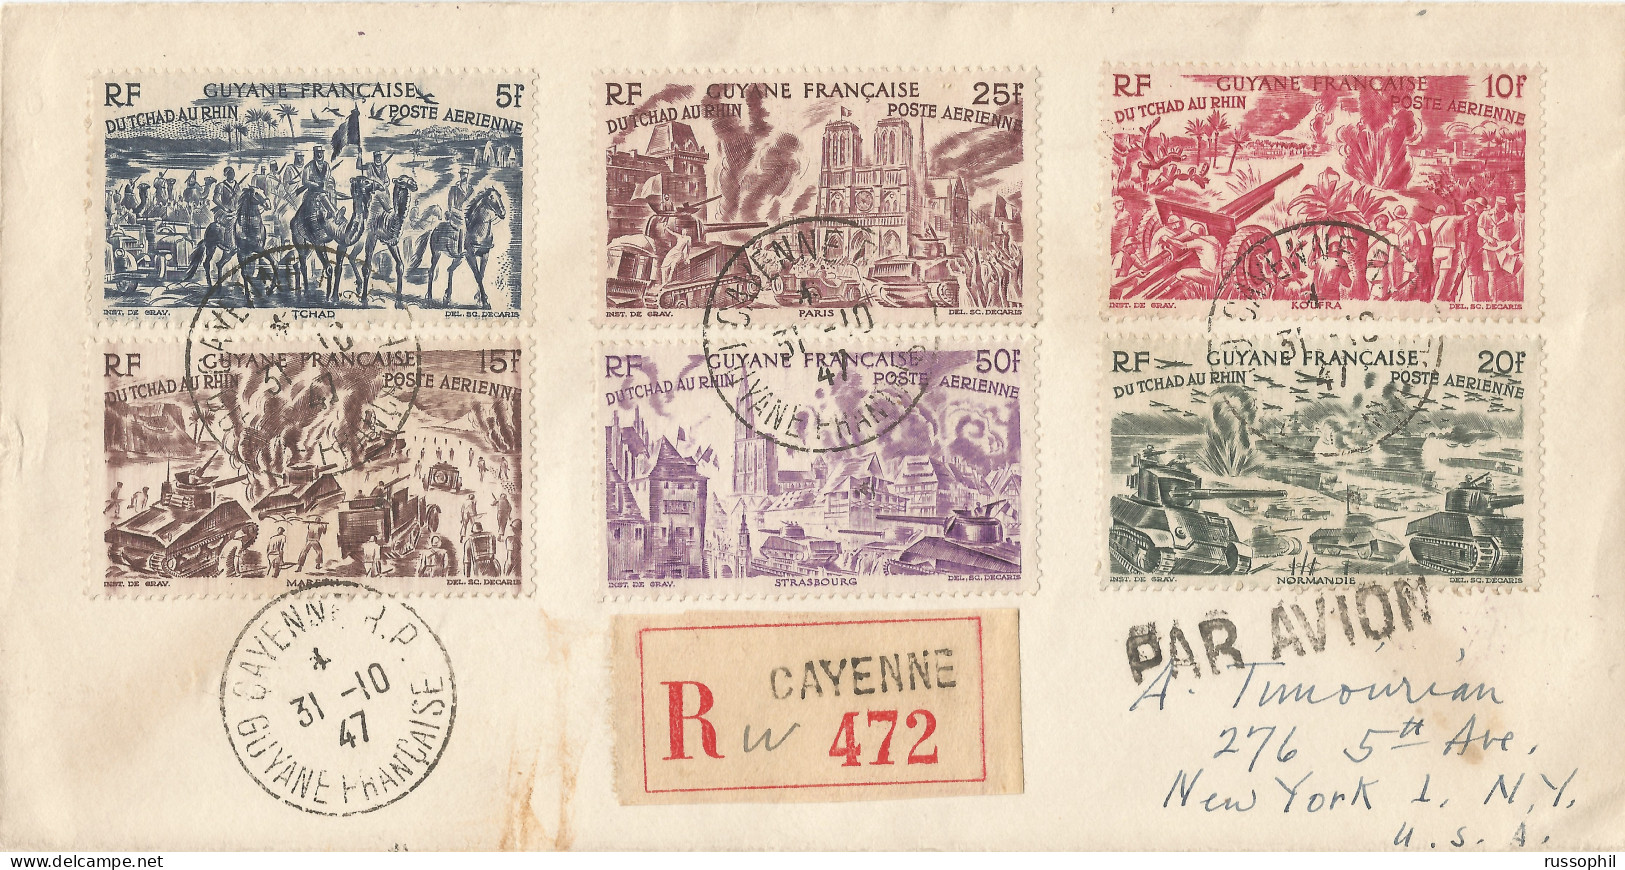 GUYANE - 6 STAMPS 125 FR.  FRANKING ON AIR MAILED REGISTERED COVER FROM CAYENNE TO THE USA - 1947 - Storia Postale